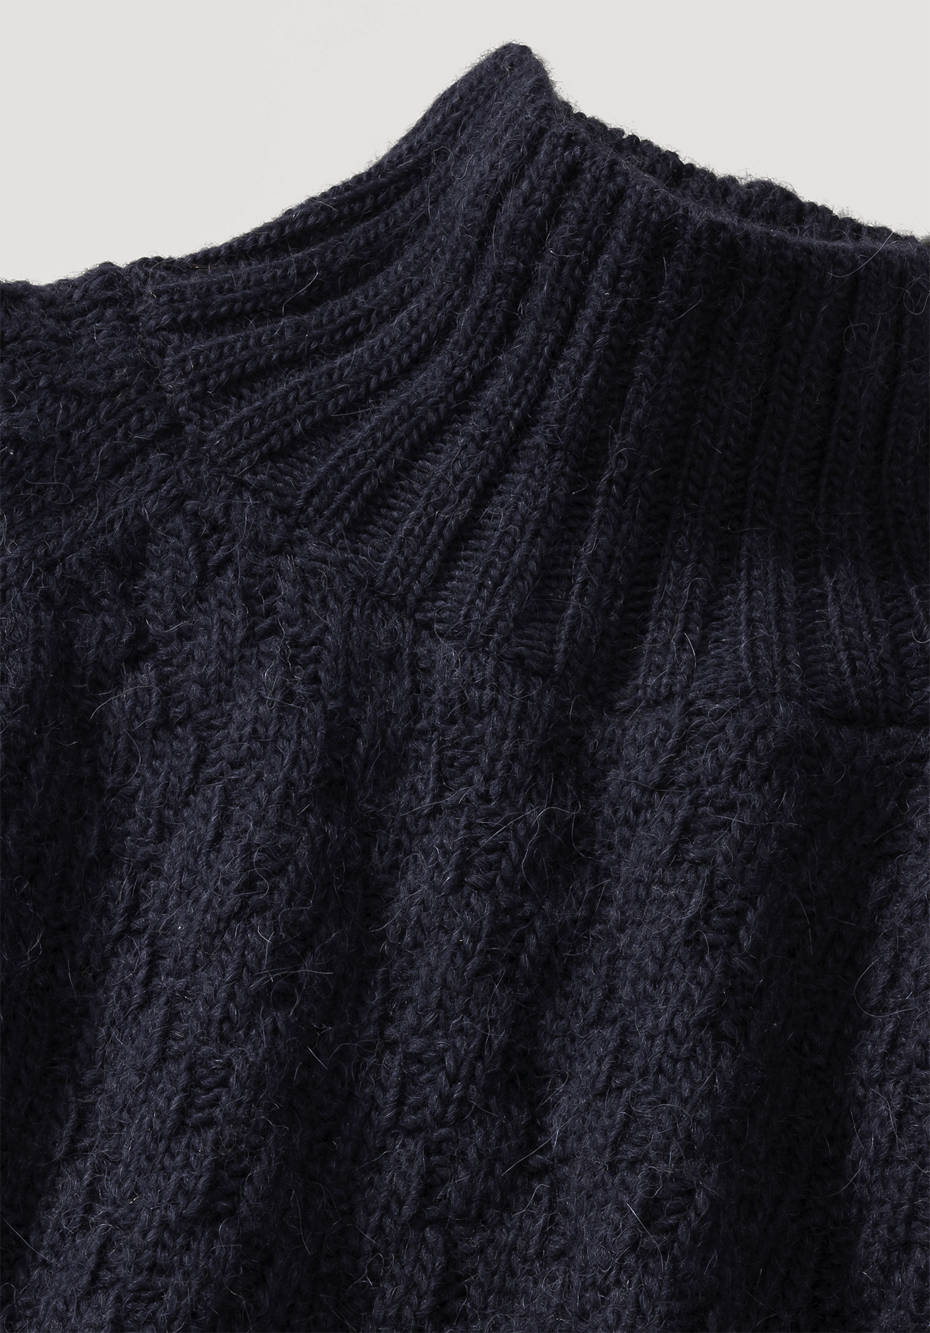 Structured sweater made of alpaca and new wool